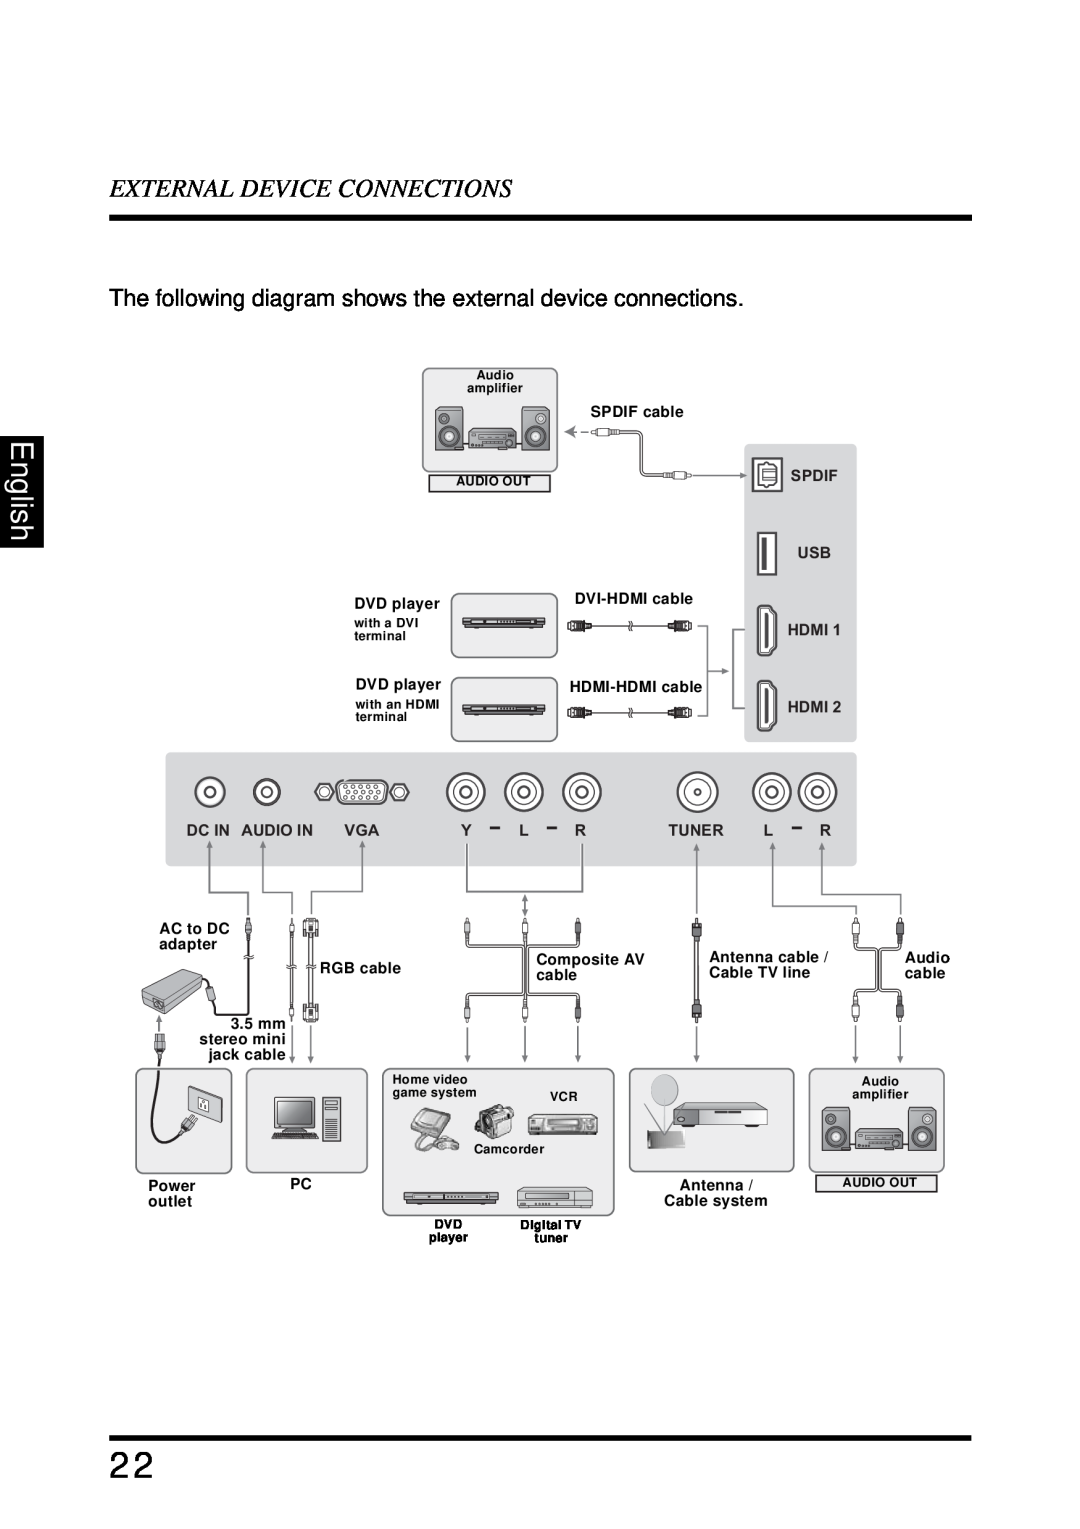 Westinghouse LD-4680 user manual English, External Device Connections, Spdif Usb, Hdmi, Dc In Audio In Vga, Tuner 